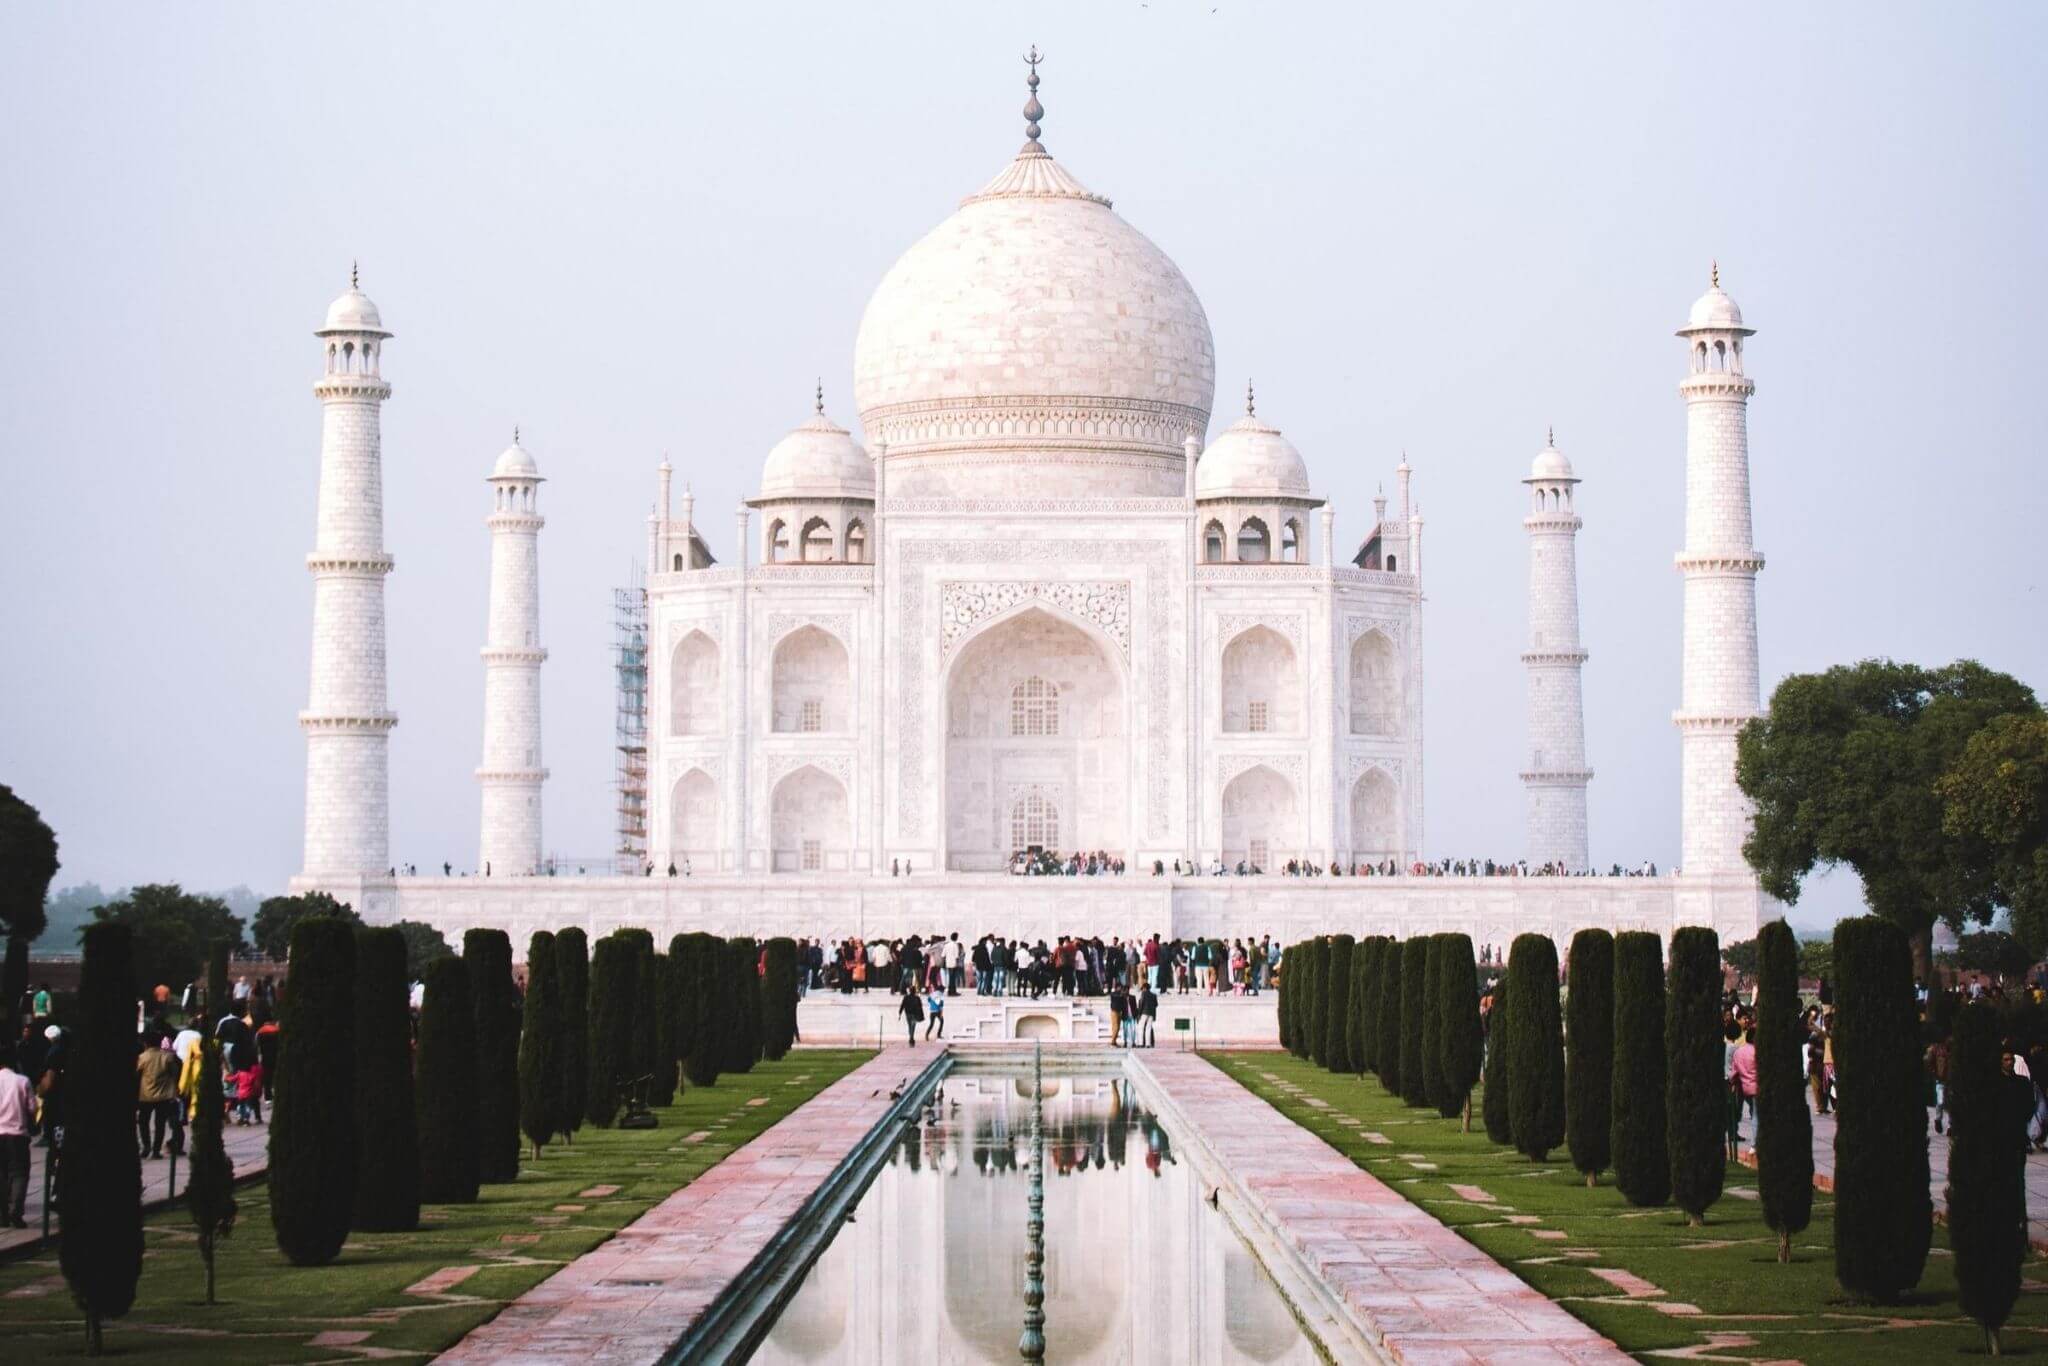 One Day Faridabad to Agra Trip by Cab